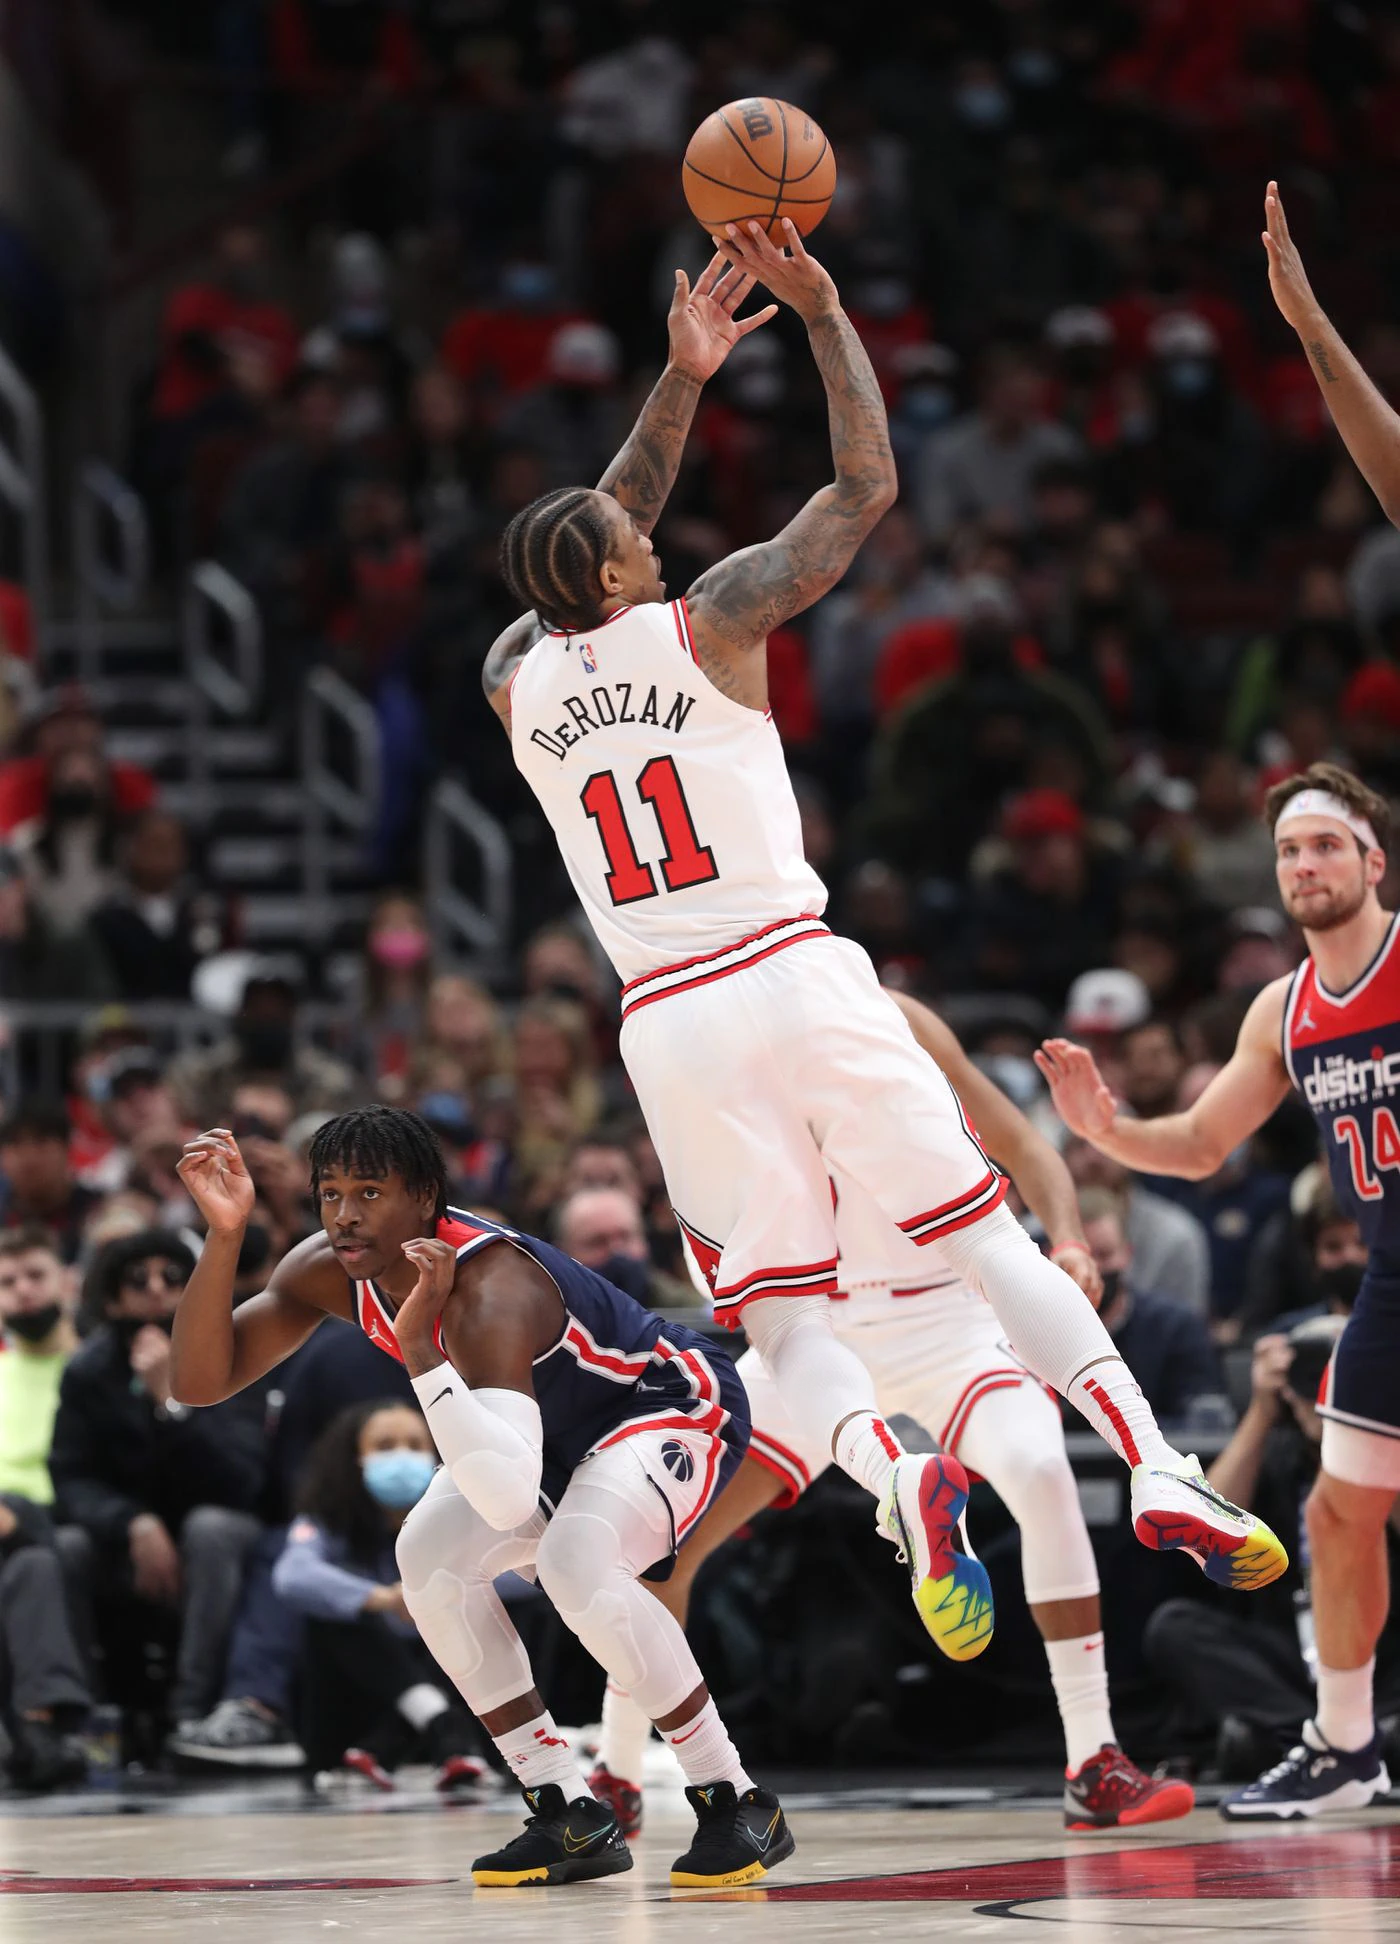 Washington Wizards guard Aaron Holiday (4) ducks as Chicago Bulls forward DeMar DeRozan (11) makes a shot attempt in the fourth quarter at United Center on Jan. 7, 2022, in Chicago.